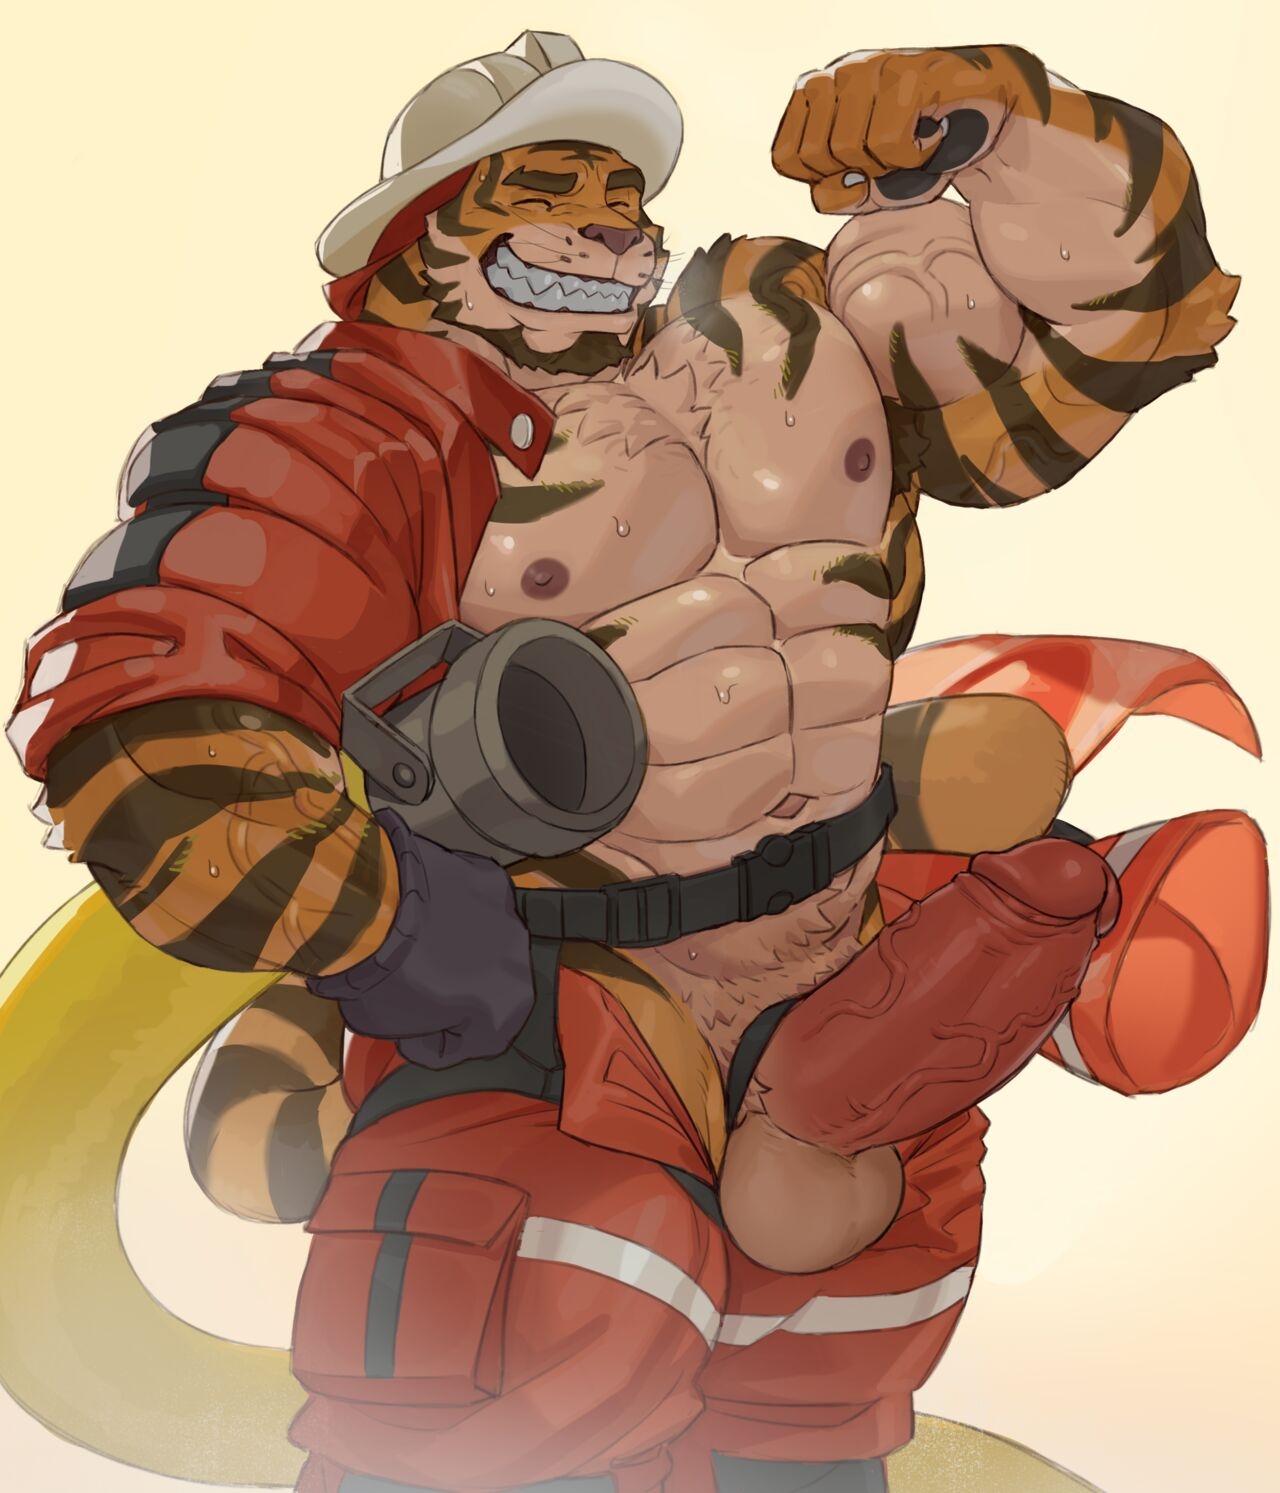 [Imatoart] Tiger Fire Chief's Training Session | 老虎消防队长的训练时间! [Chinese][Translated by Chrome Heart Tags] 37